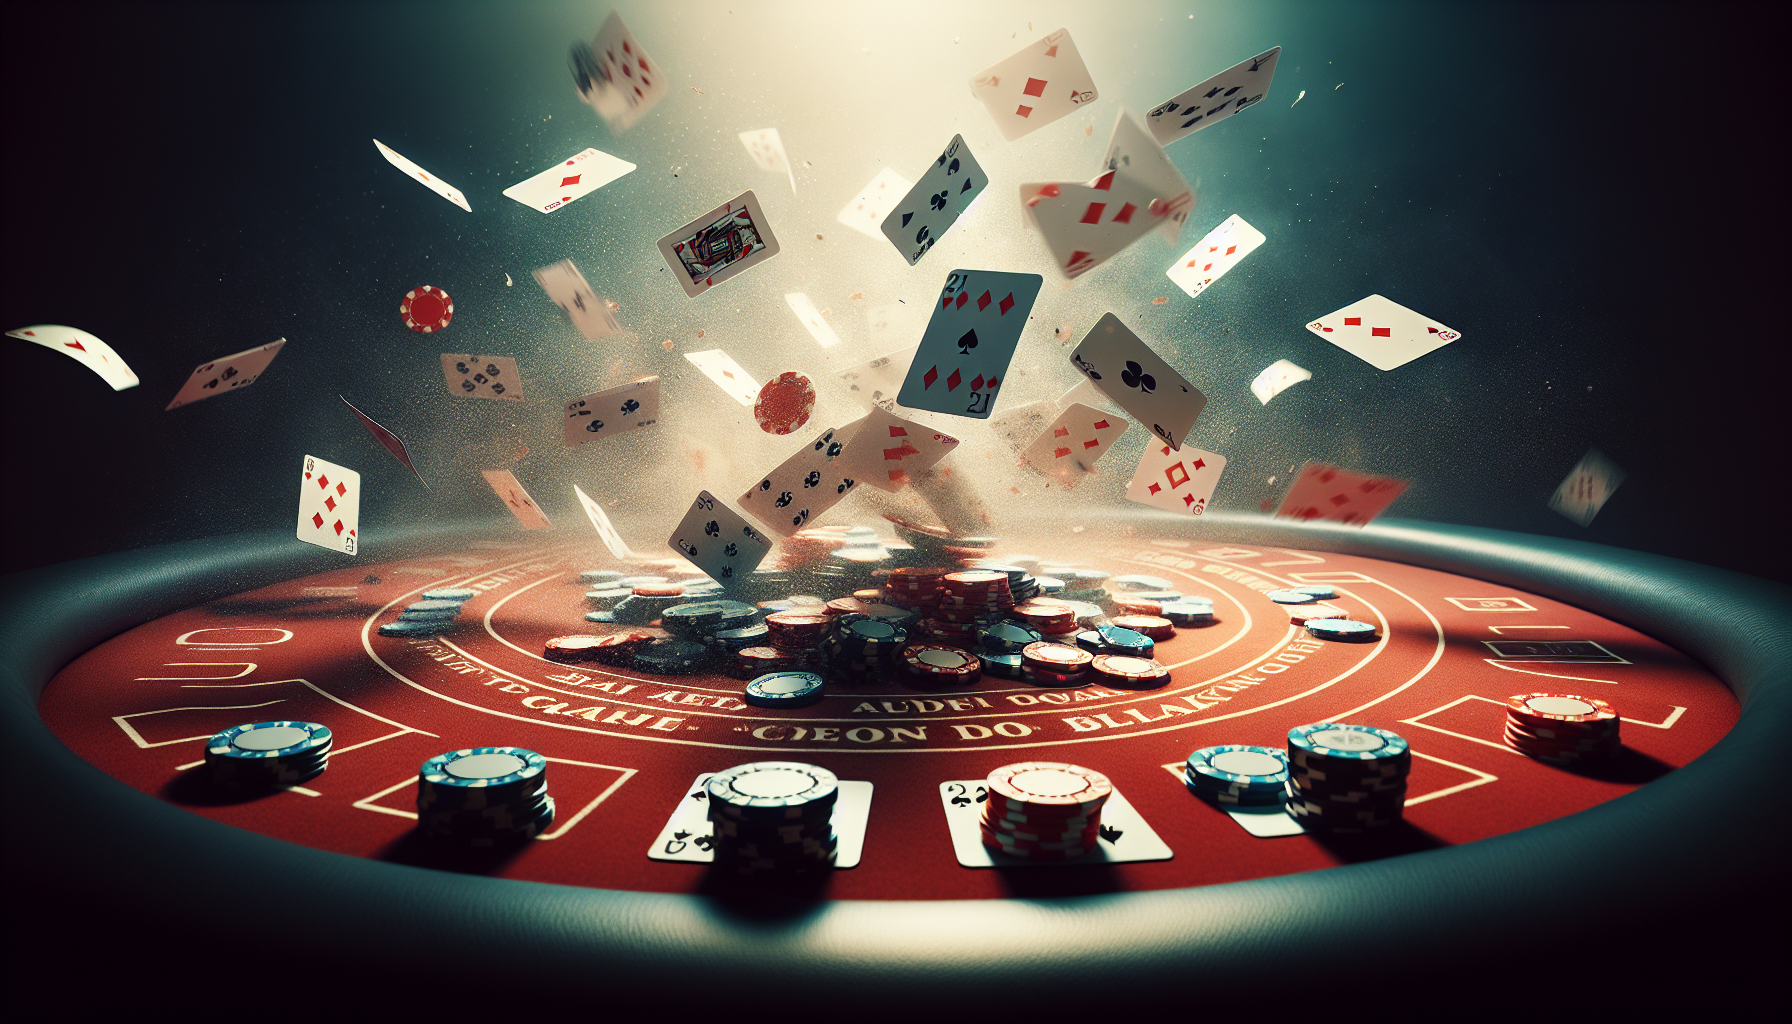 The Best Strategy for Online Blackjack: Optimal Times to Stand